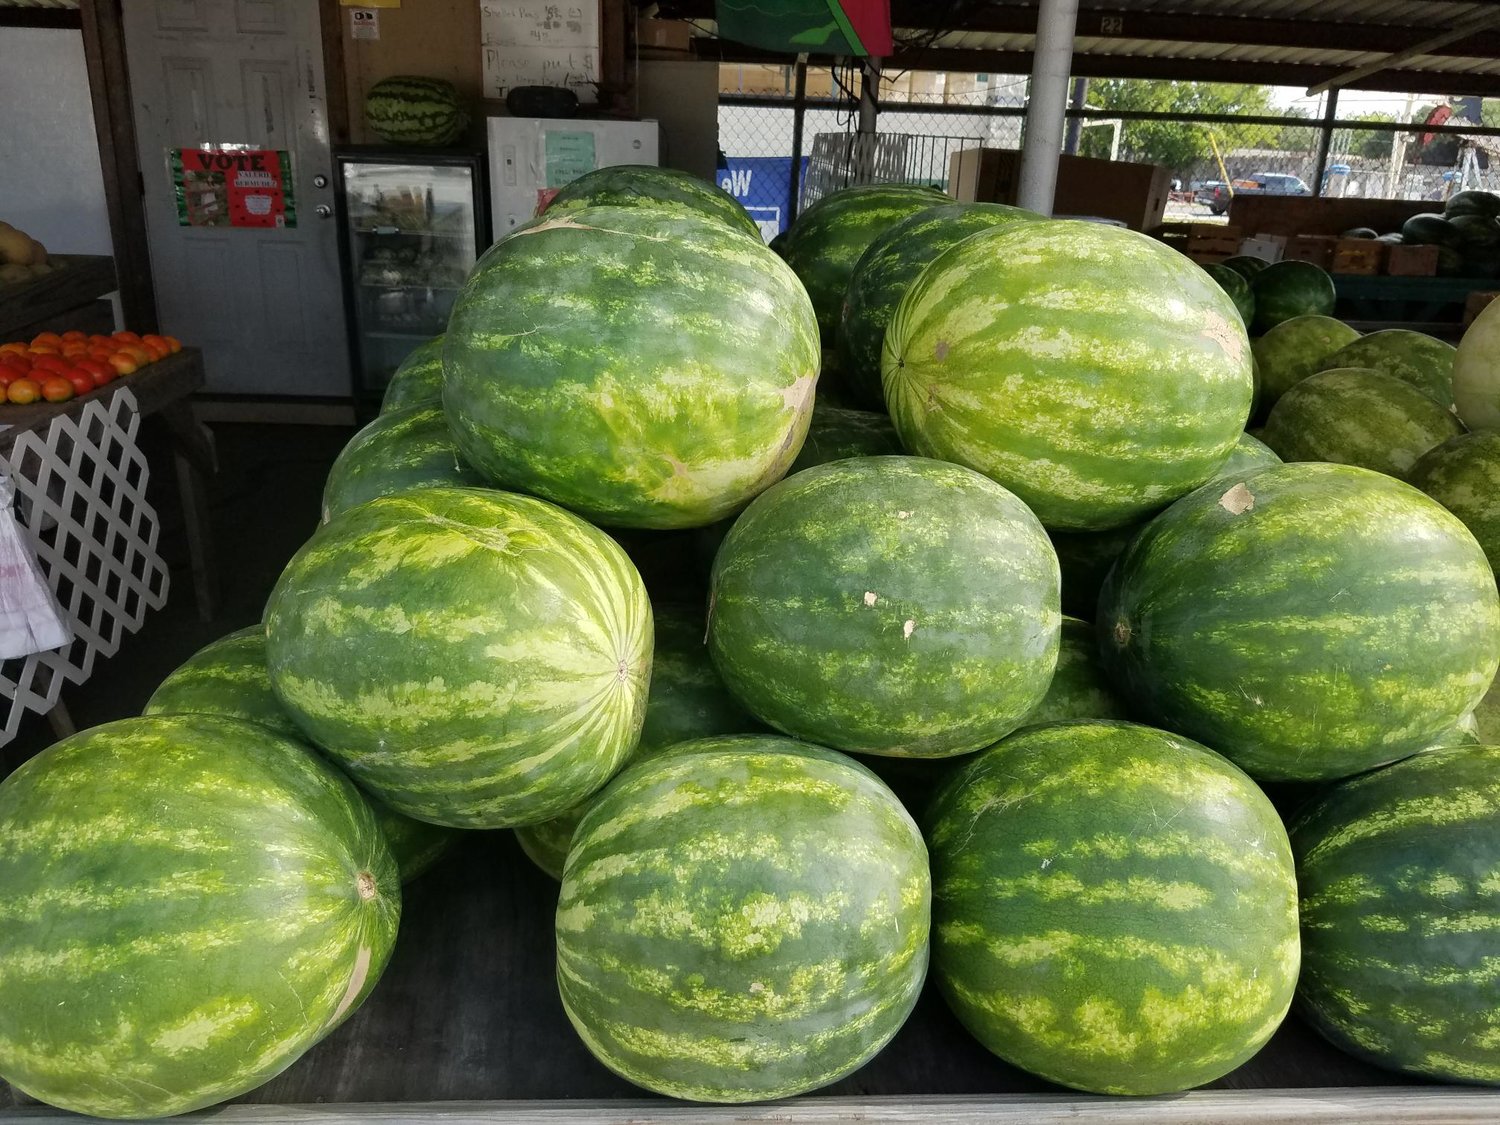 Watermelons are the big stars this weekend as the 66th annual Watermelon Thump Festival kicks off in Luling tonight and runs through Sunday.